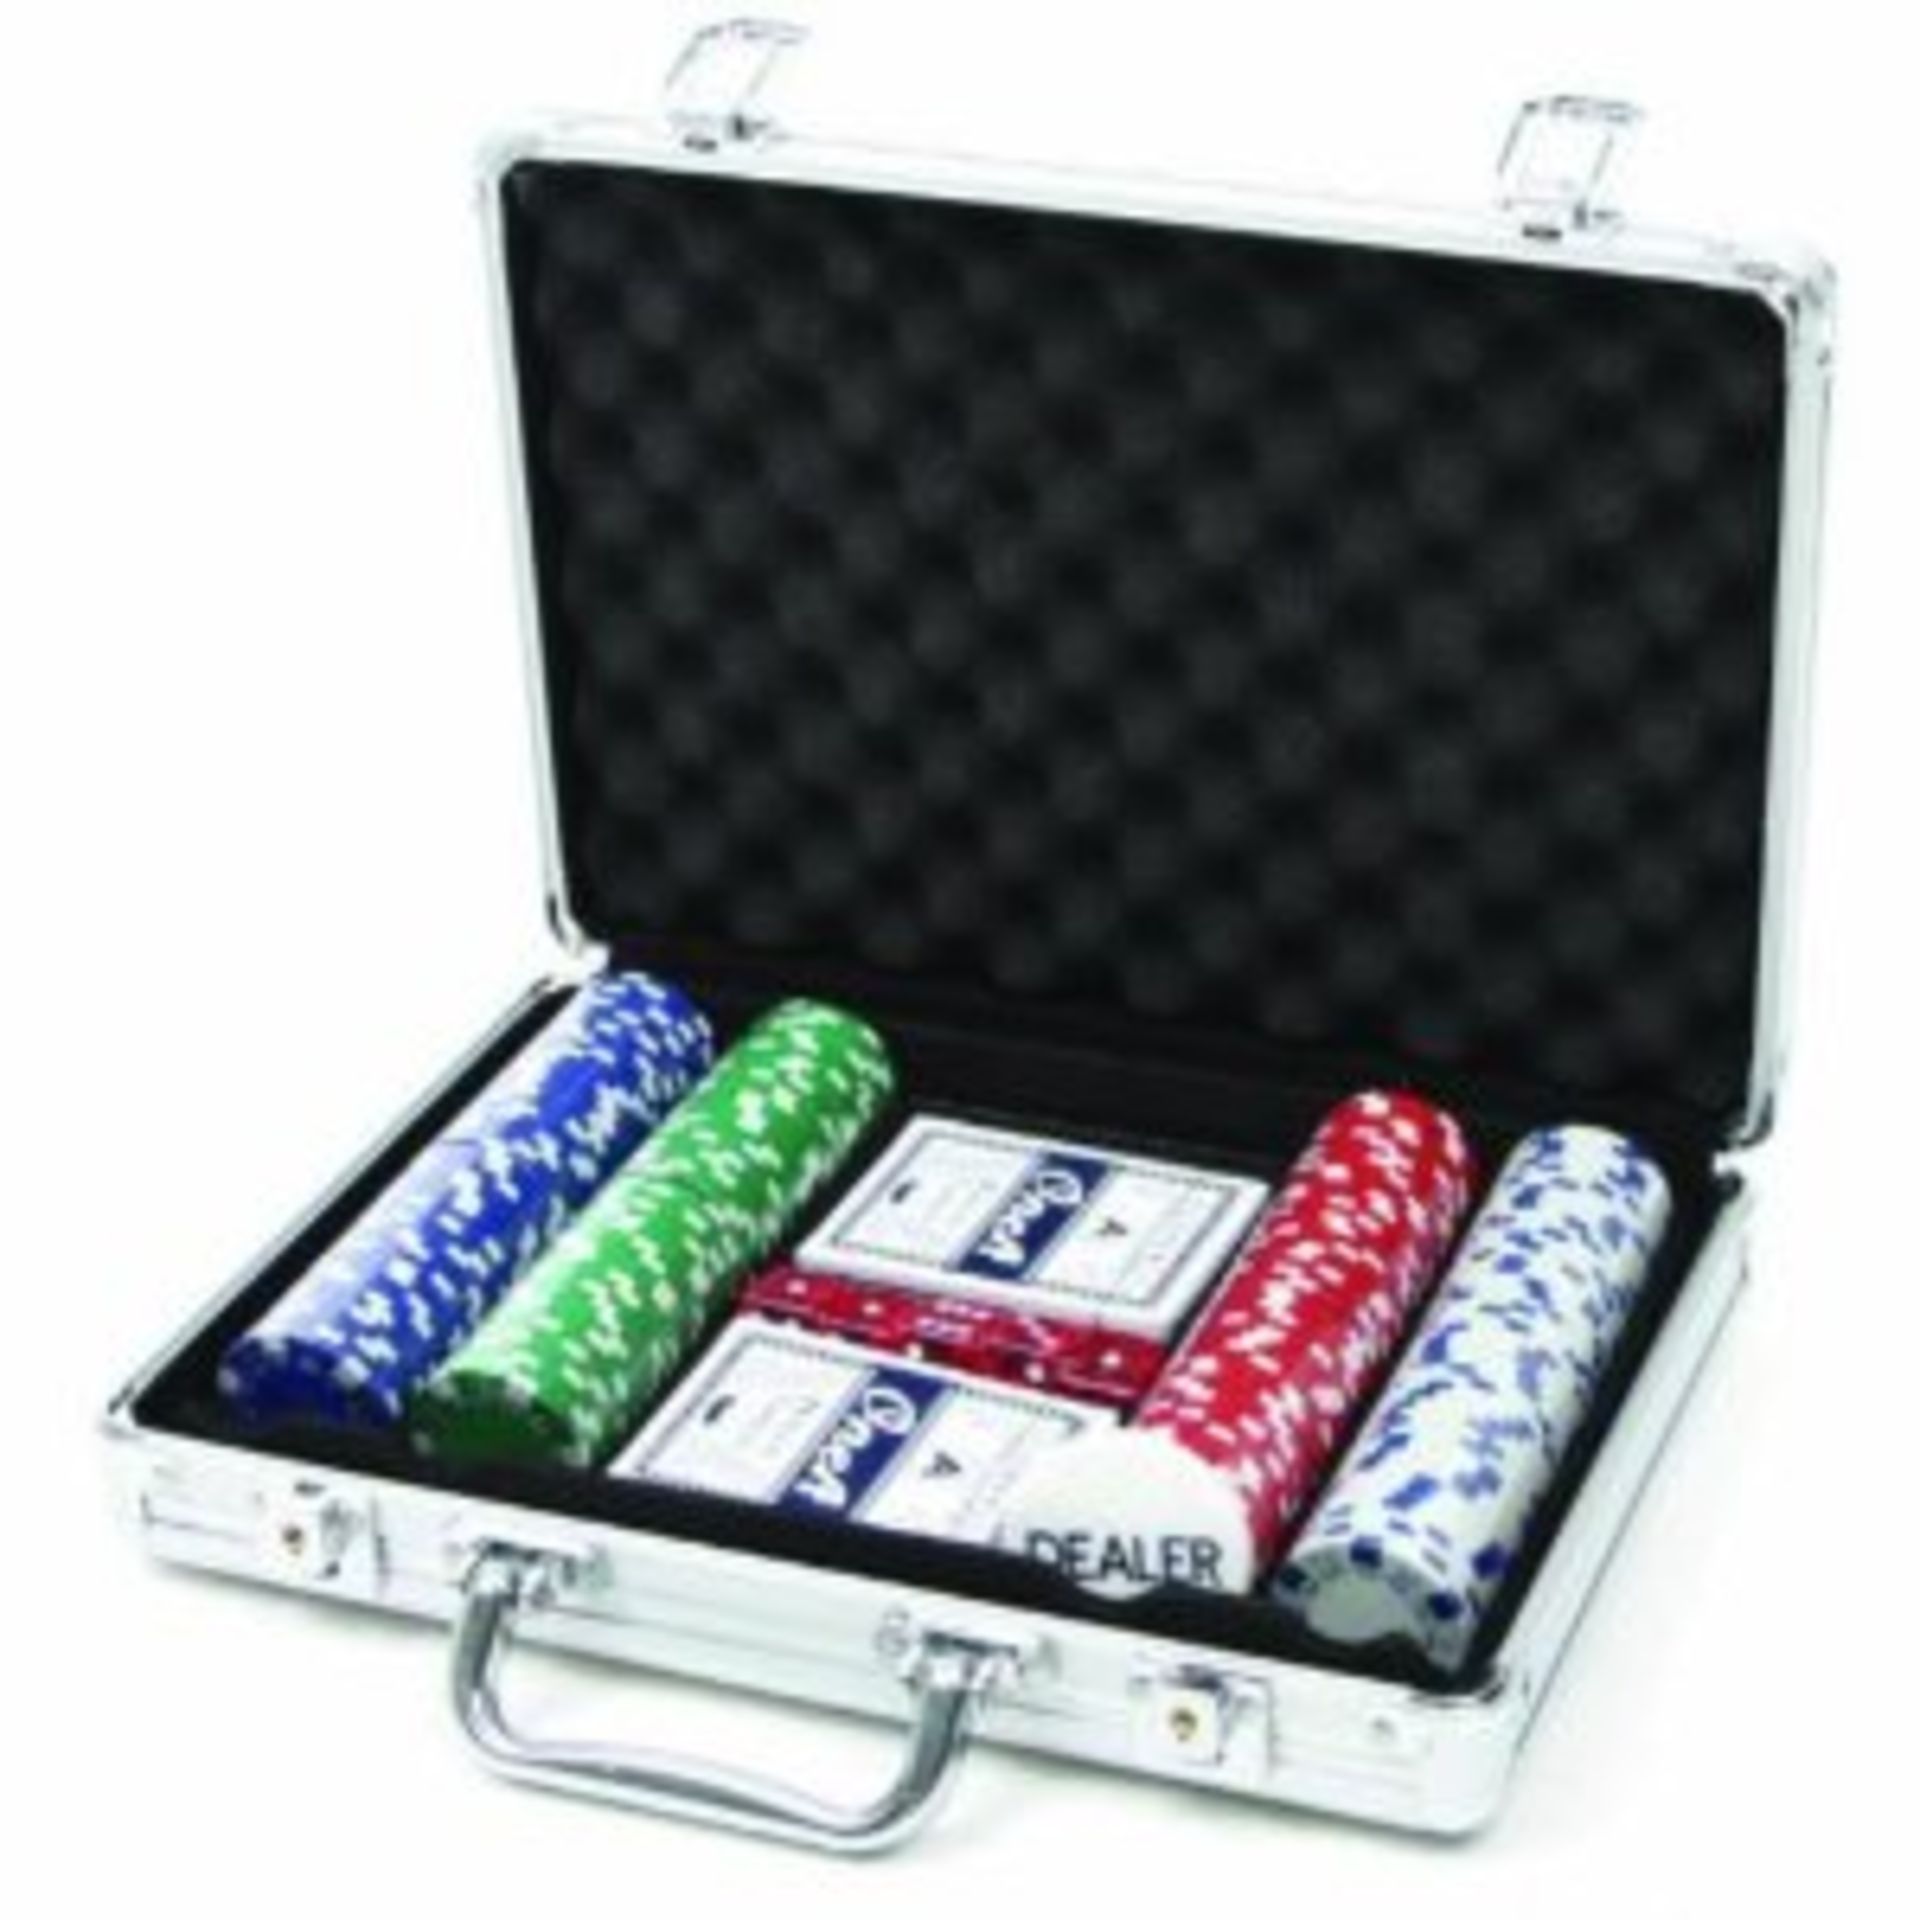 V Two hundred piece Poker and Gaming Set in aluminium case RRP 39.99 - Image 2 of 2